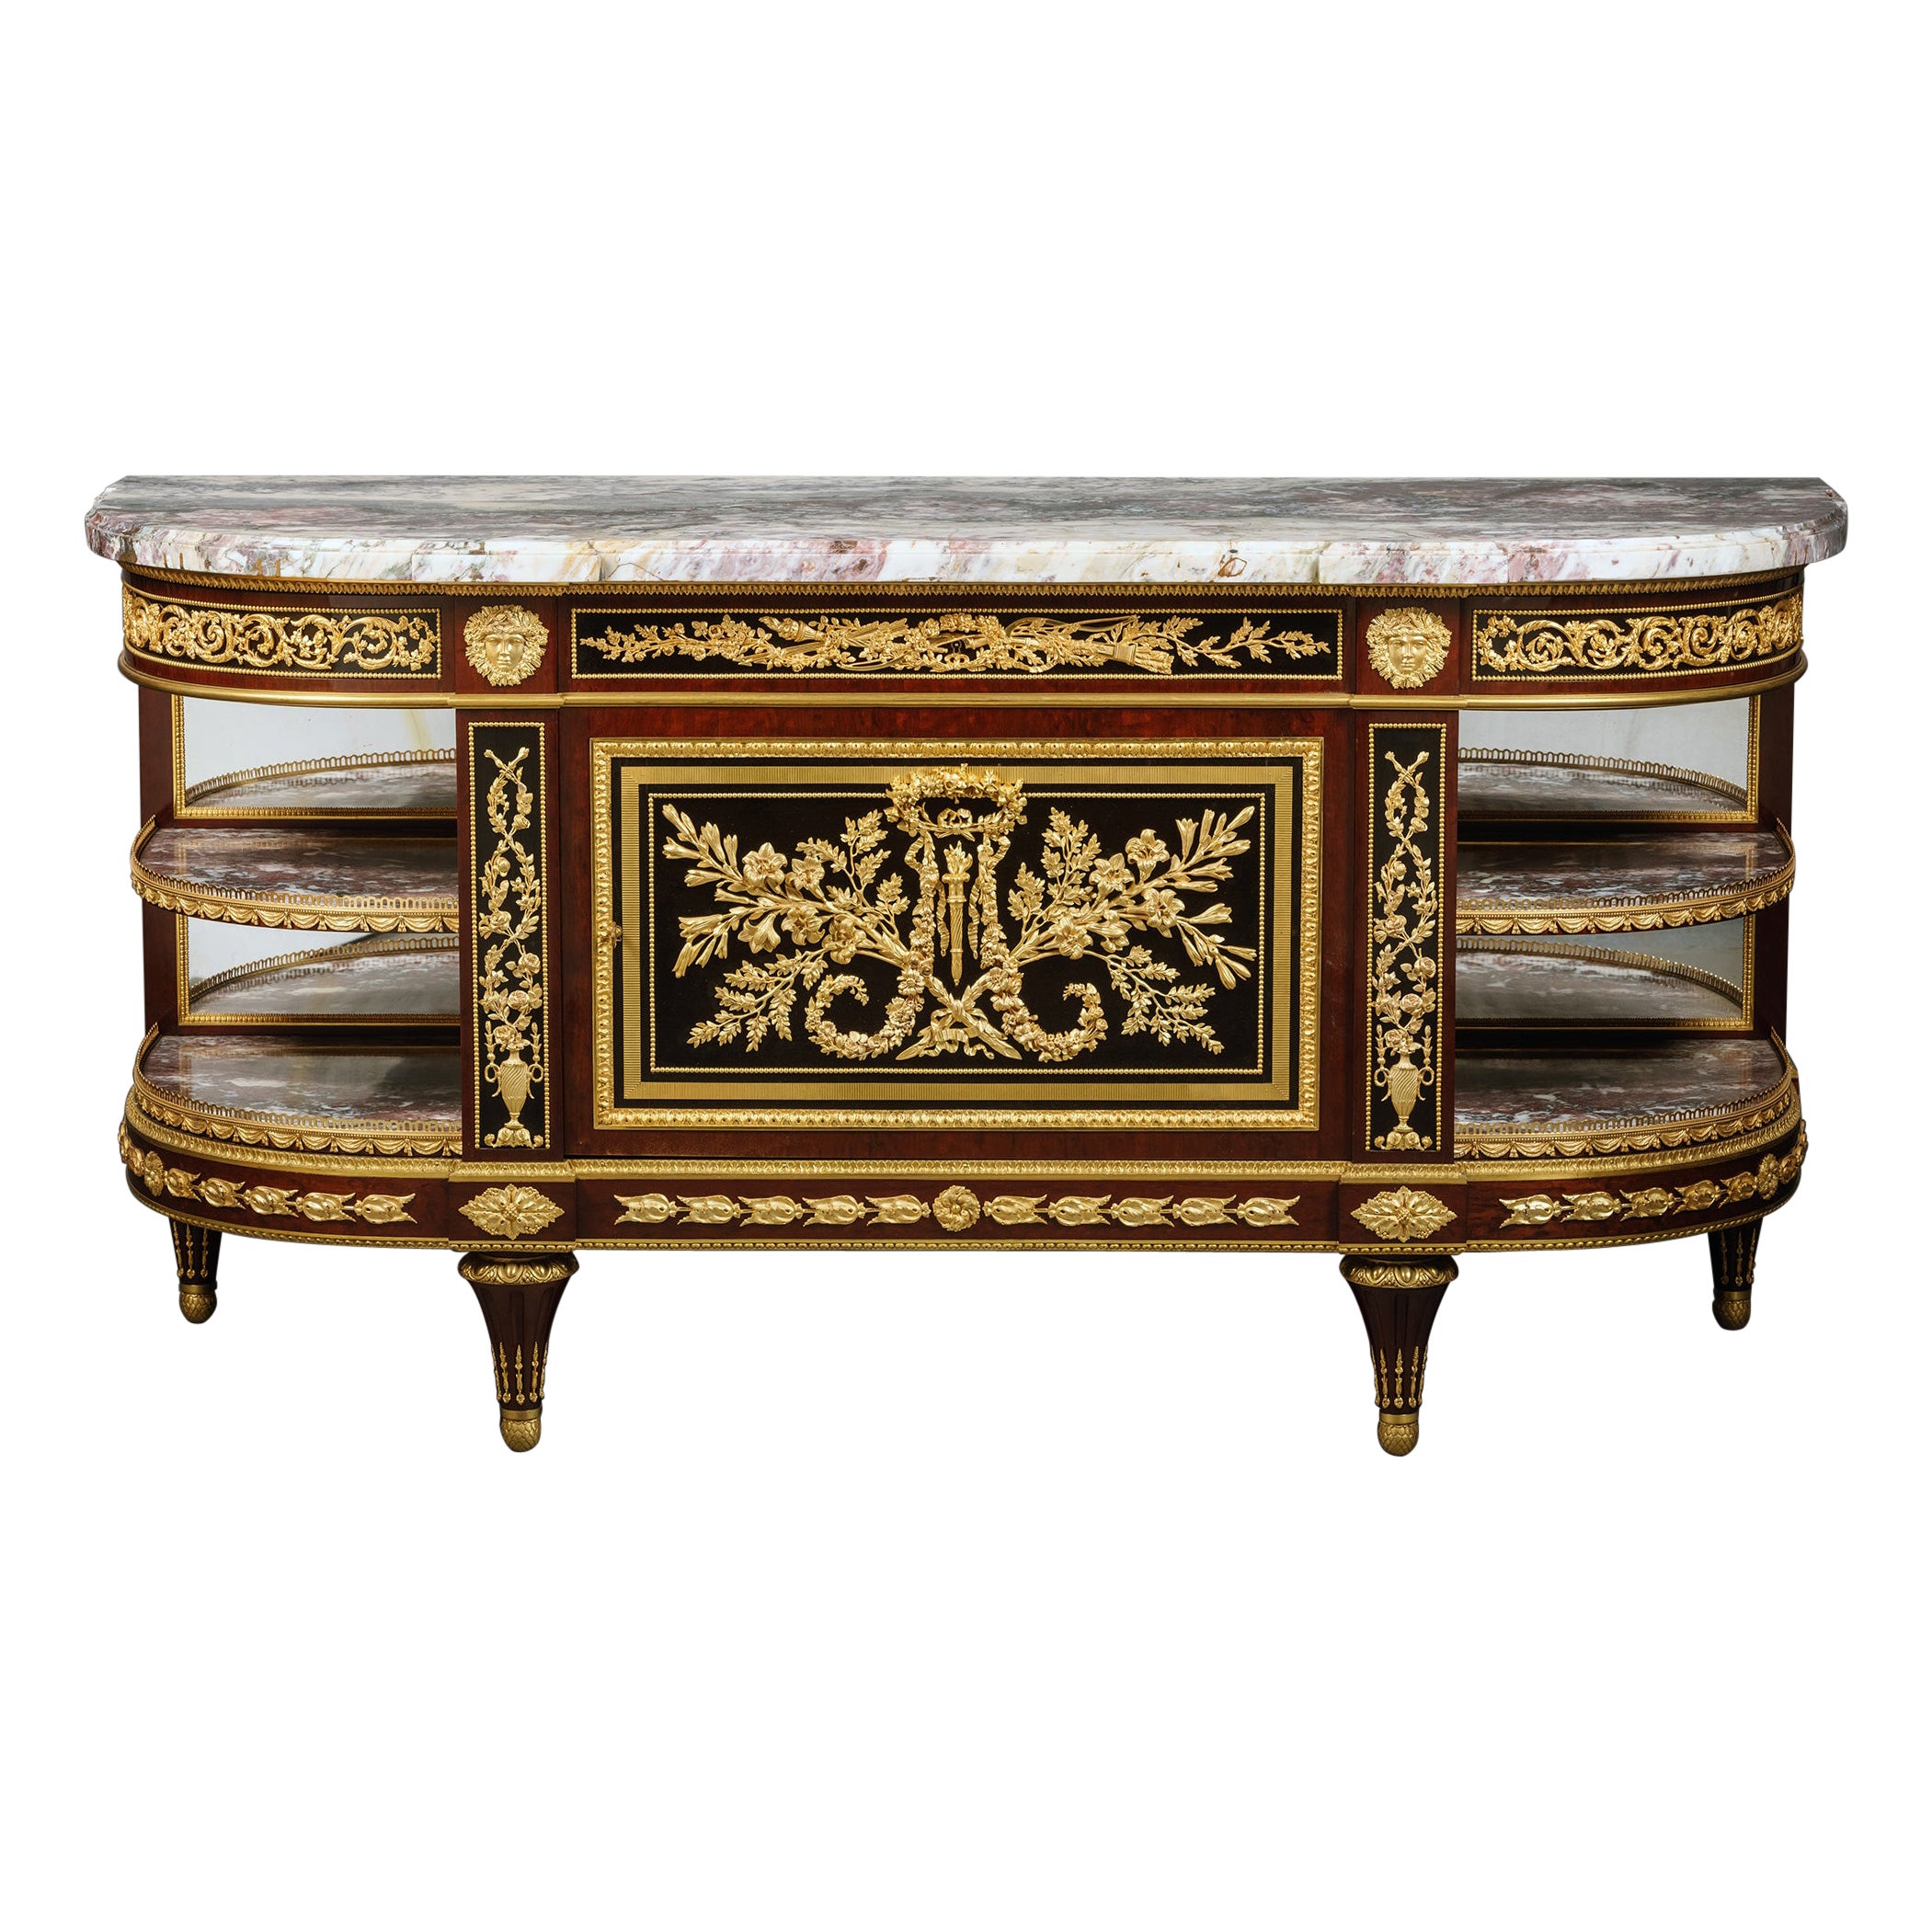 A Louis XVI Style Gilt-Bronze Mounted Mahogany and Ebonised Commode à l'Anglaise For Sale